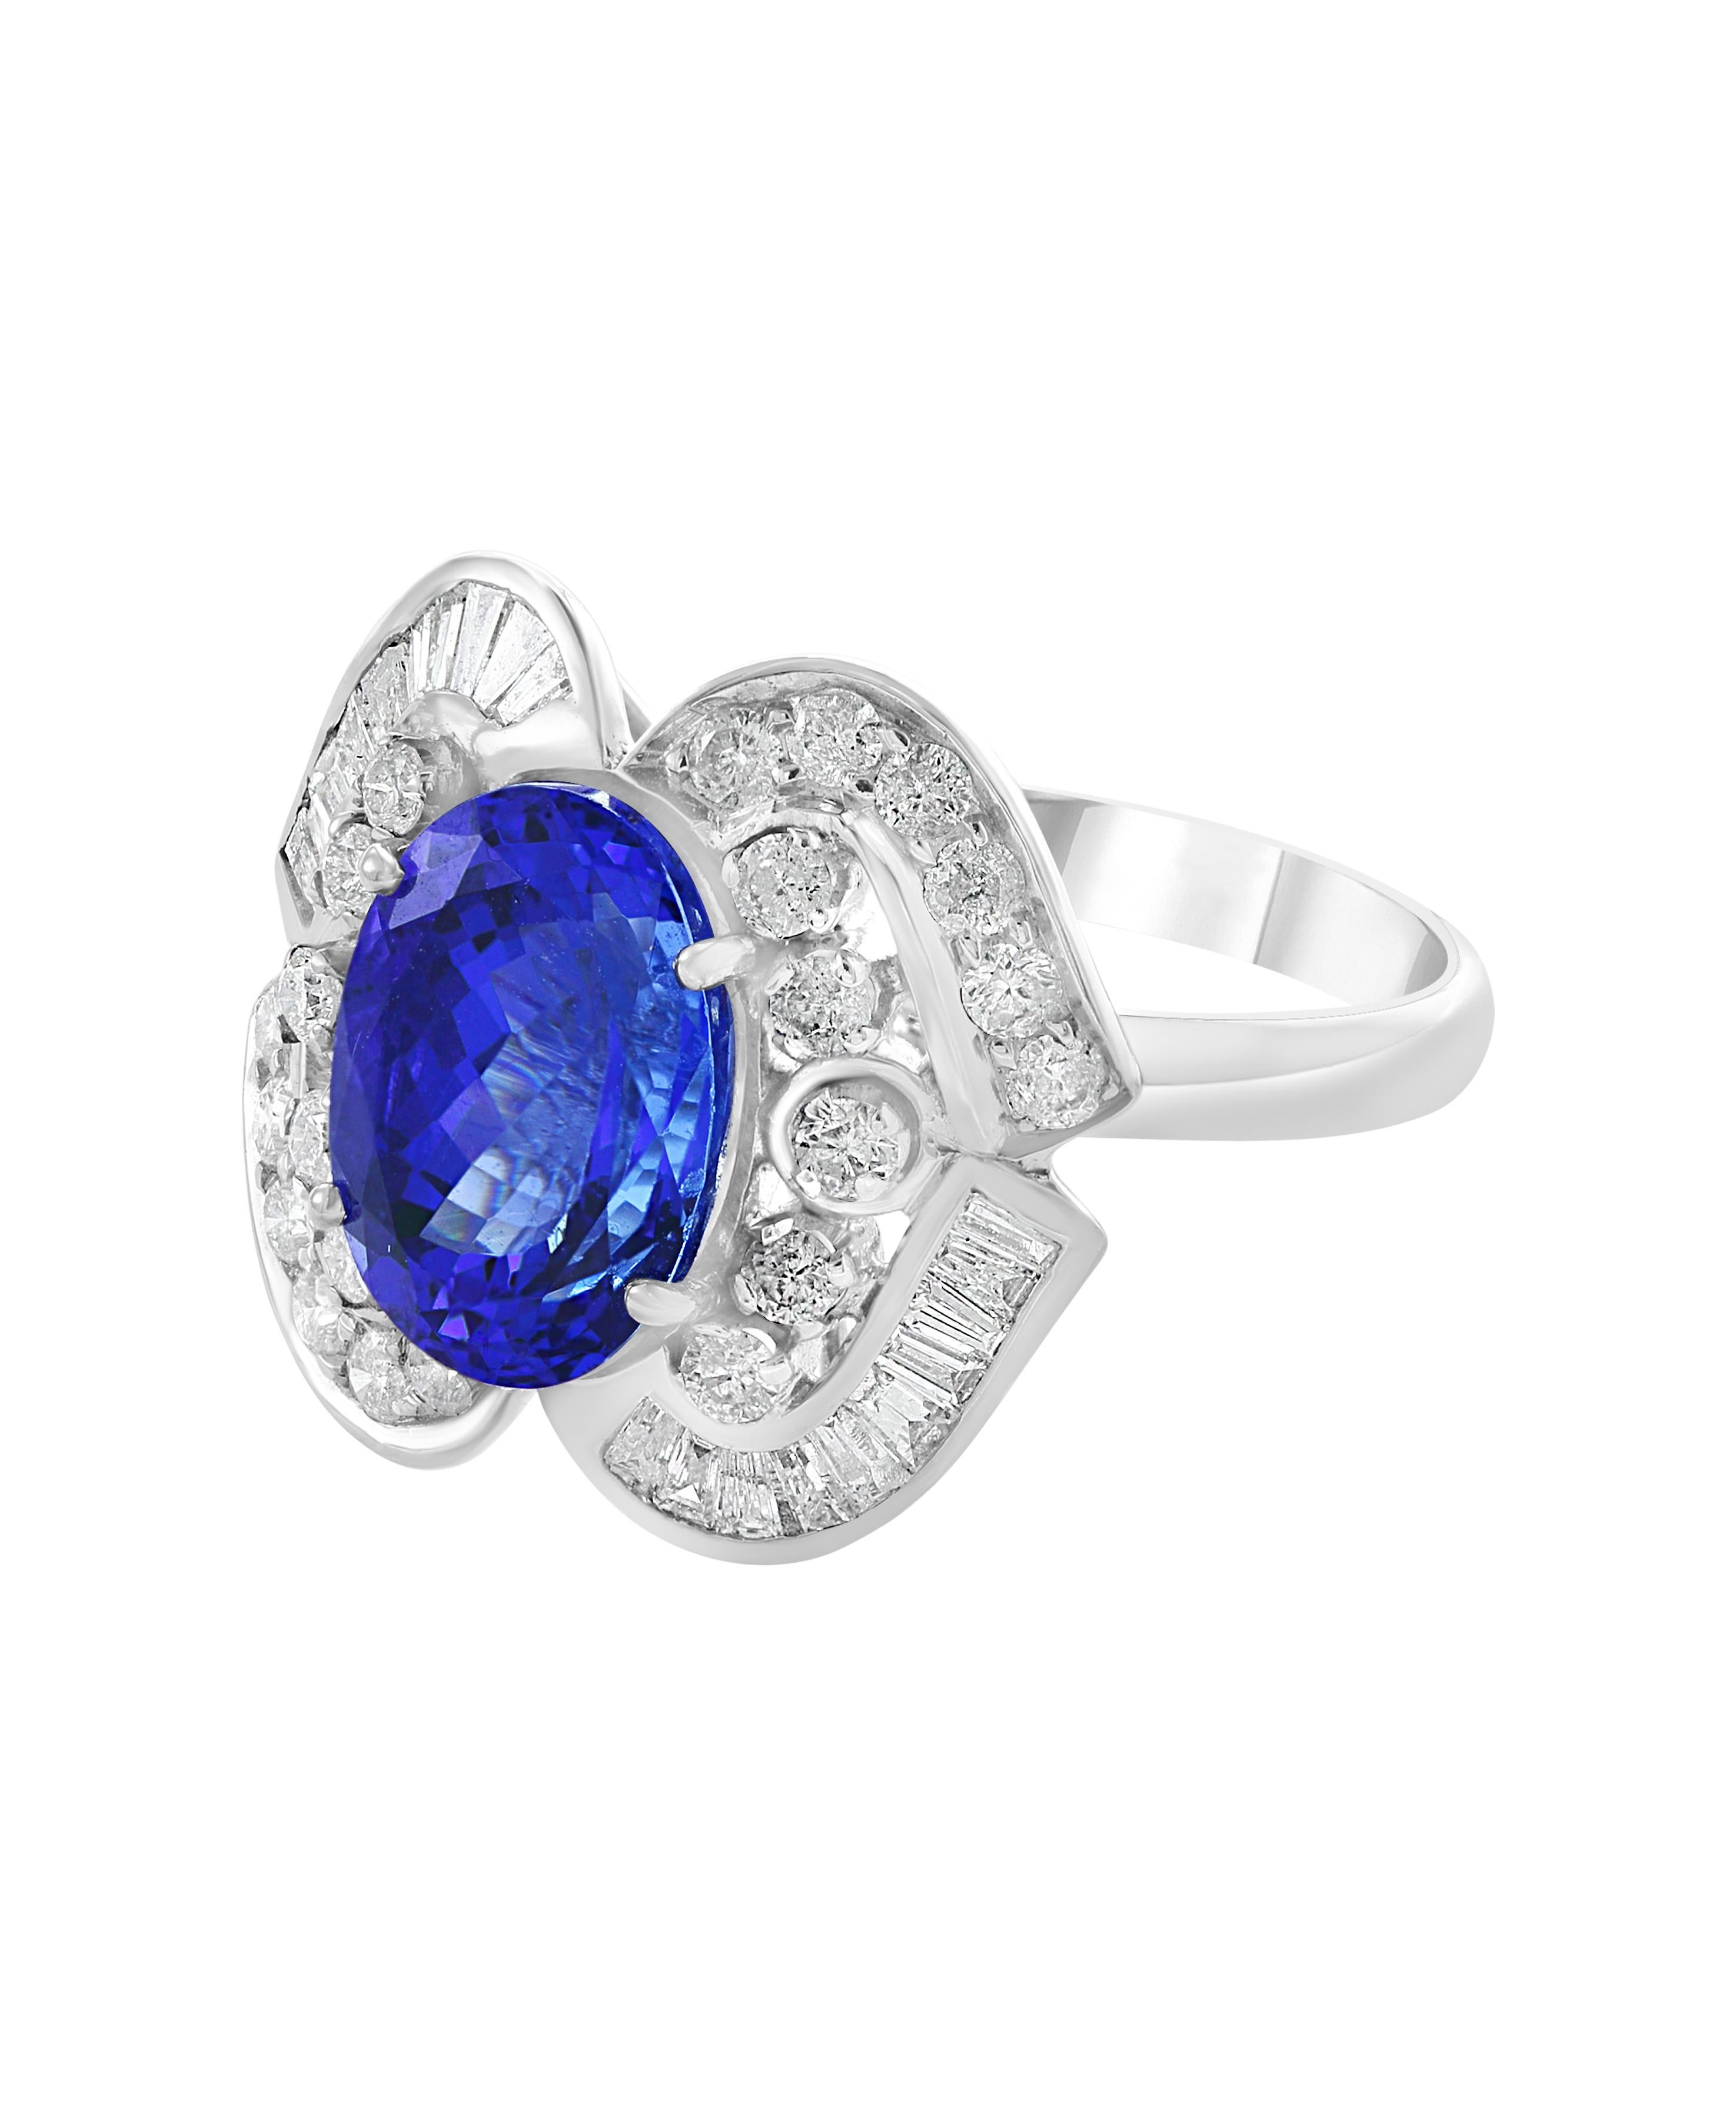 5.38 Carat Oval Tanzanite and Diamond Ring 18 Karat White Gold, Estate In Excellent Condition For Sale In New York, NY